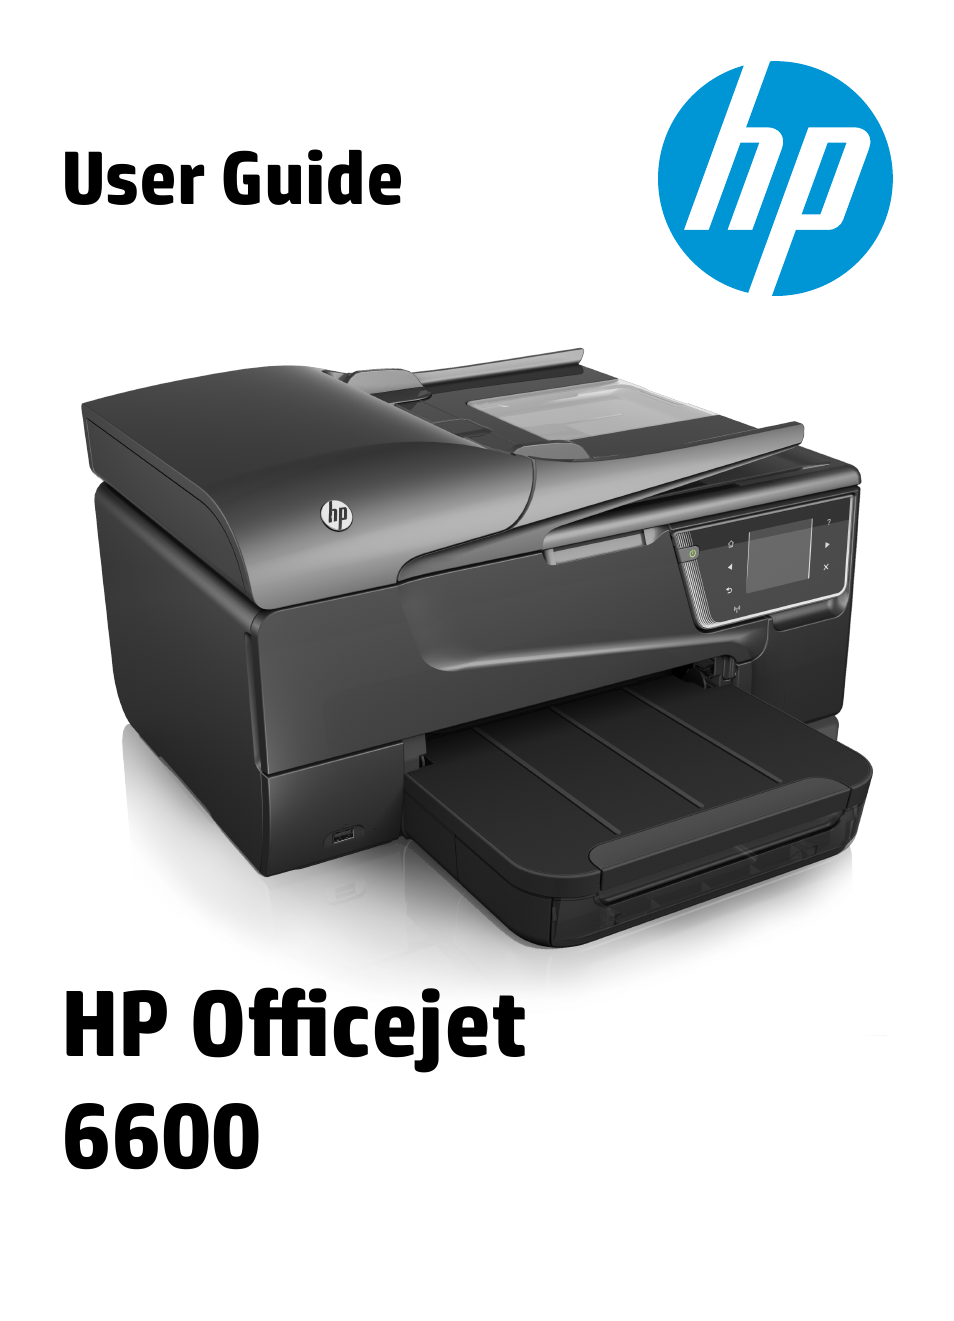 HP Officejet 6600 e-All-in-One Printer - H711a H711g User Manual | 216 pages